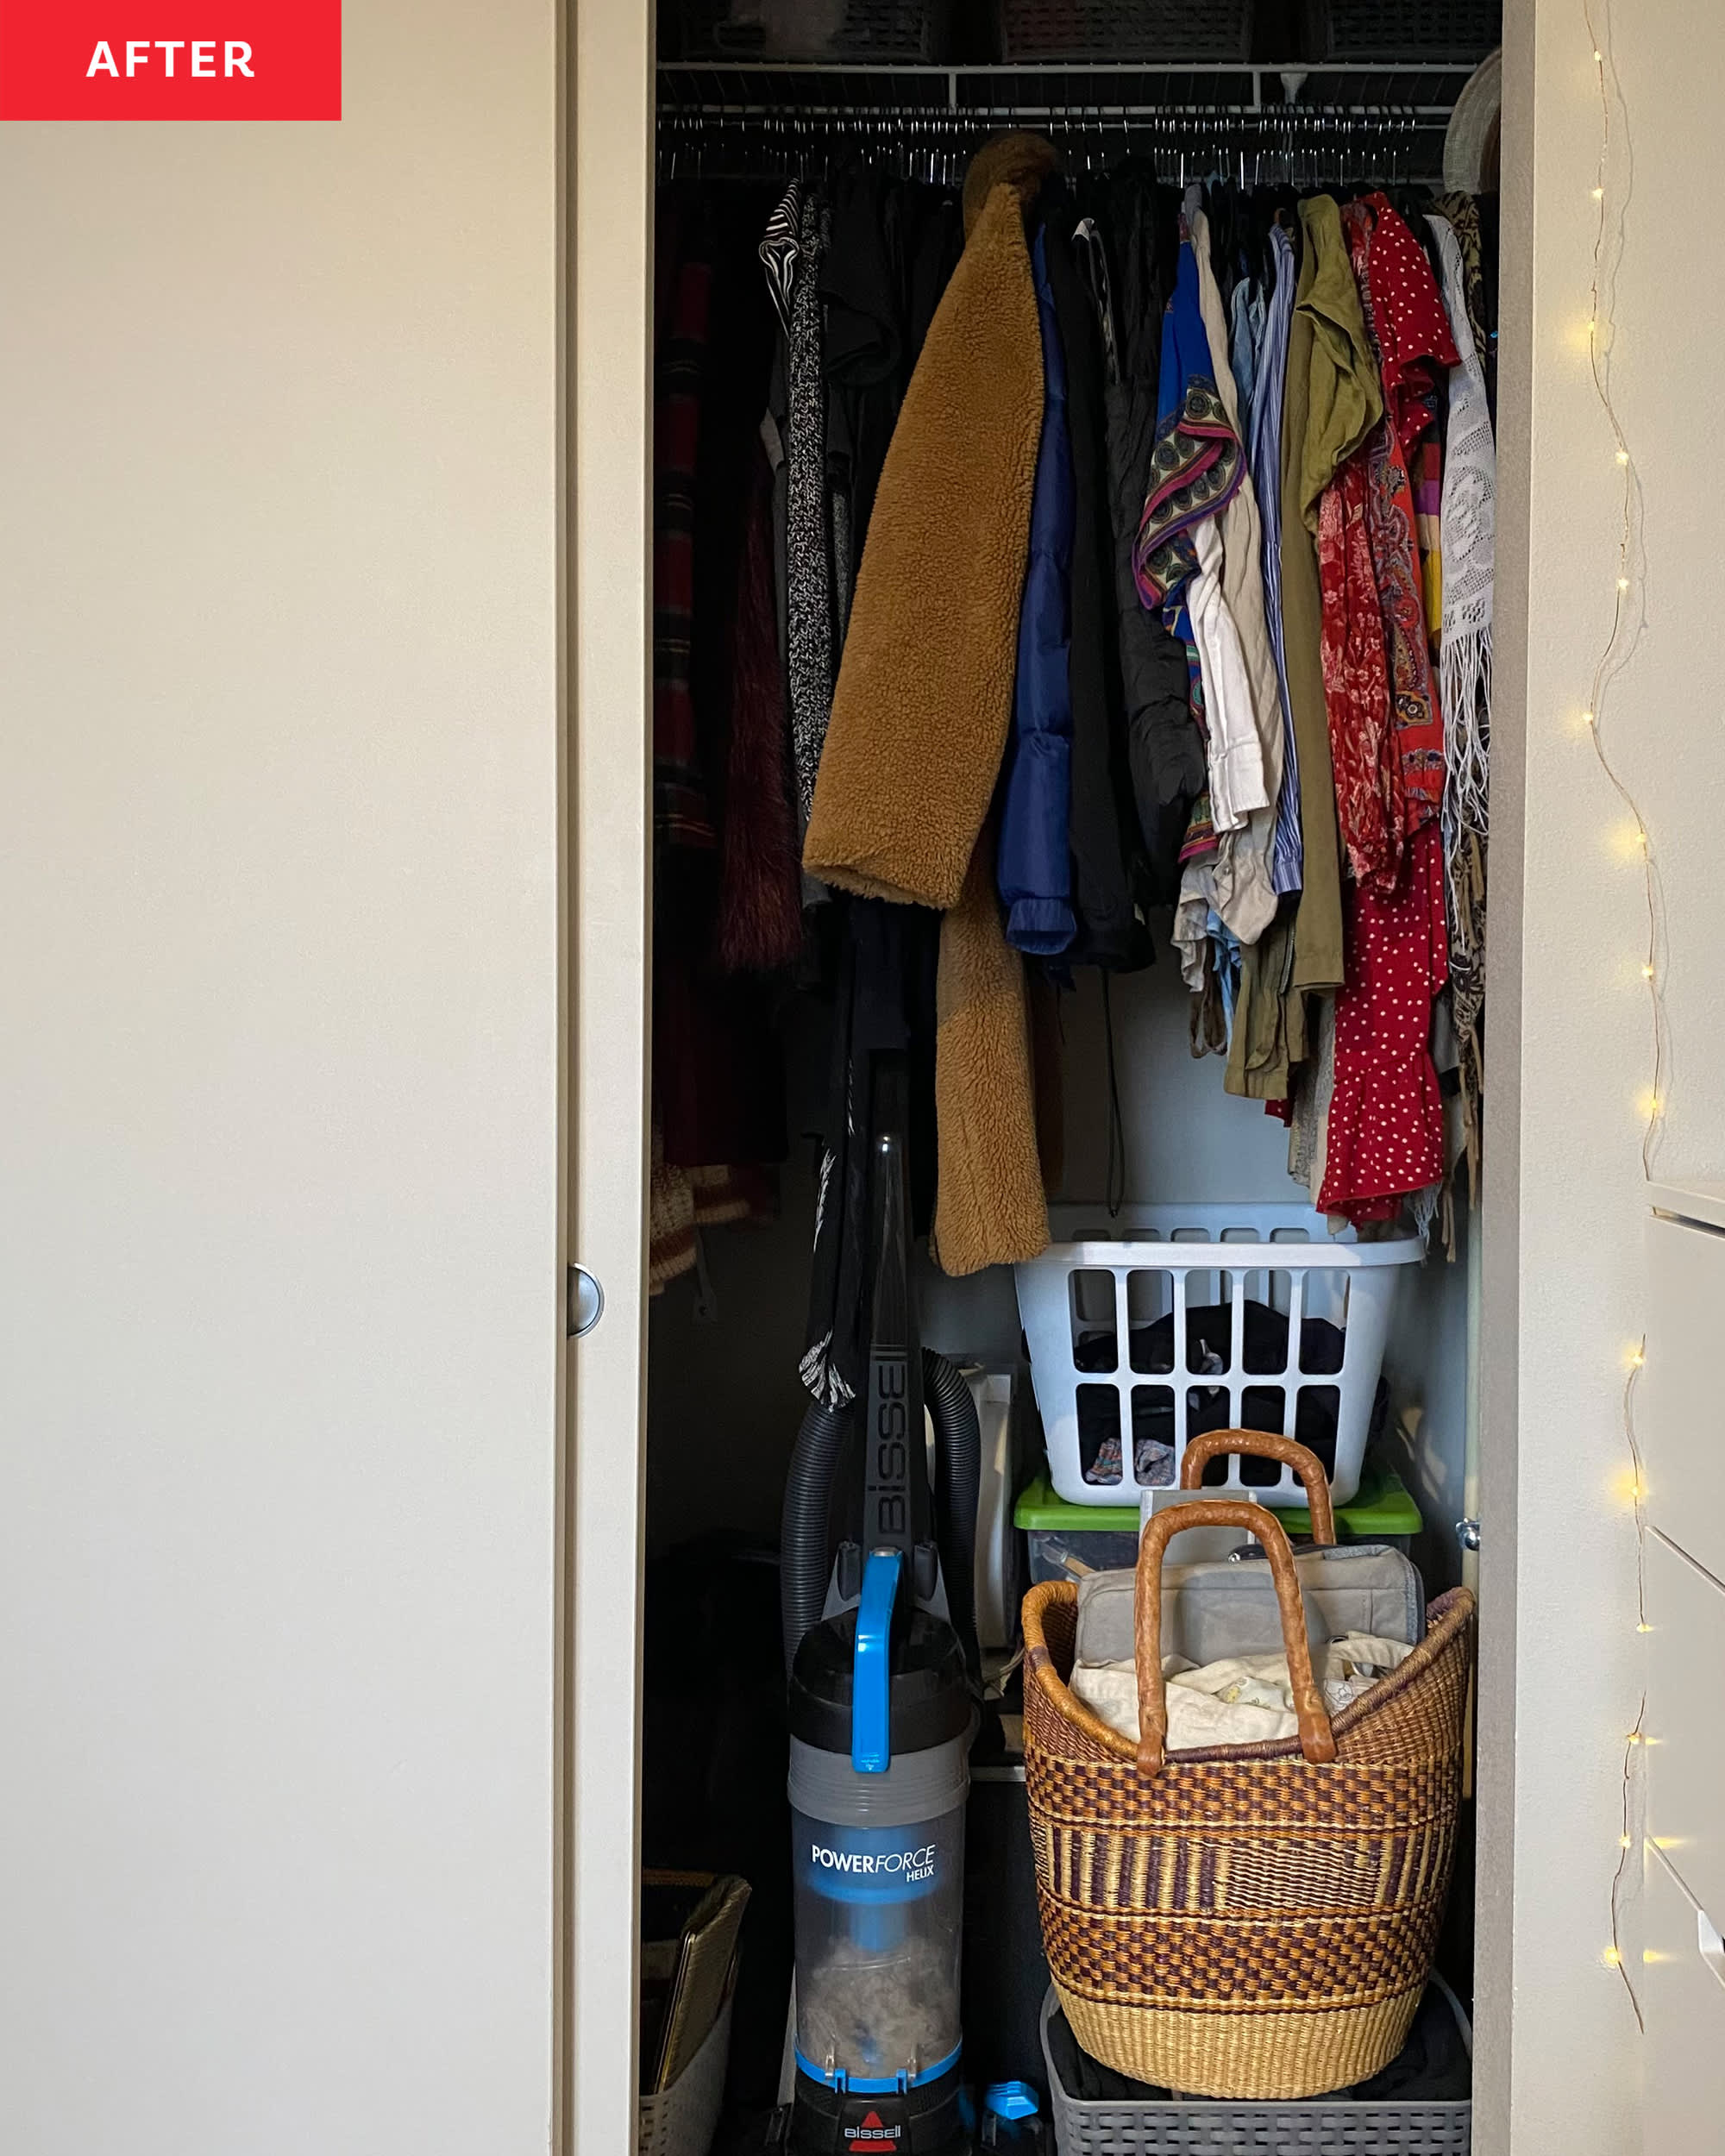 https://cdn.apartmenttherapy.info/image/upload/v1679423568/at/organize-clean/before-after/pro-organizer-closet/right-side-closet-after.jpg